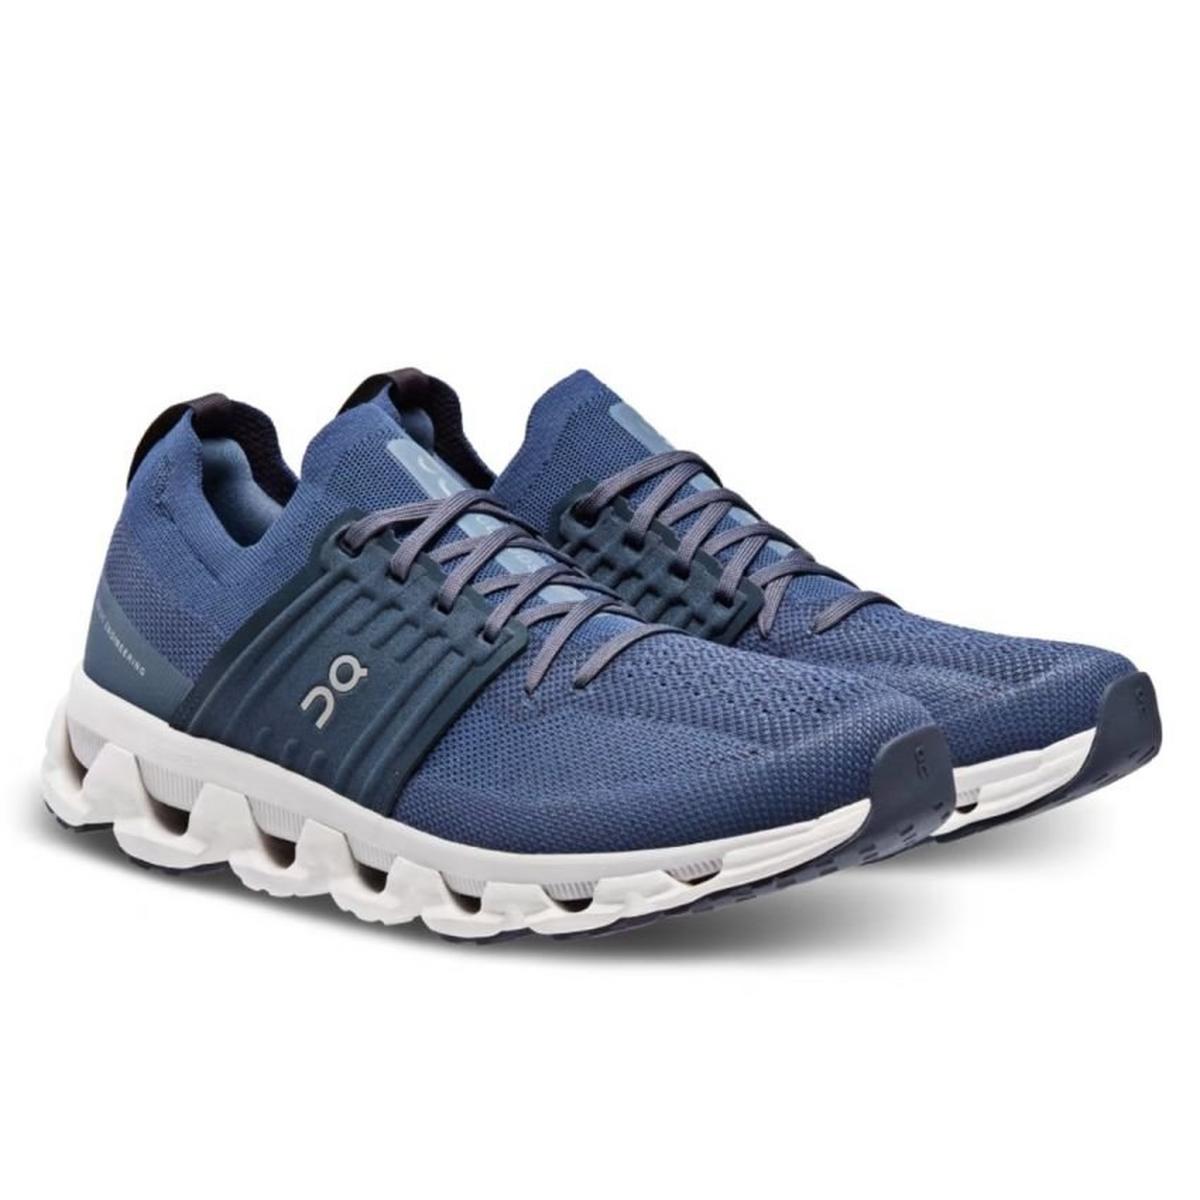 On Men's Cloudswift 3 Running Shoes - Midnight